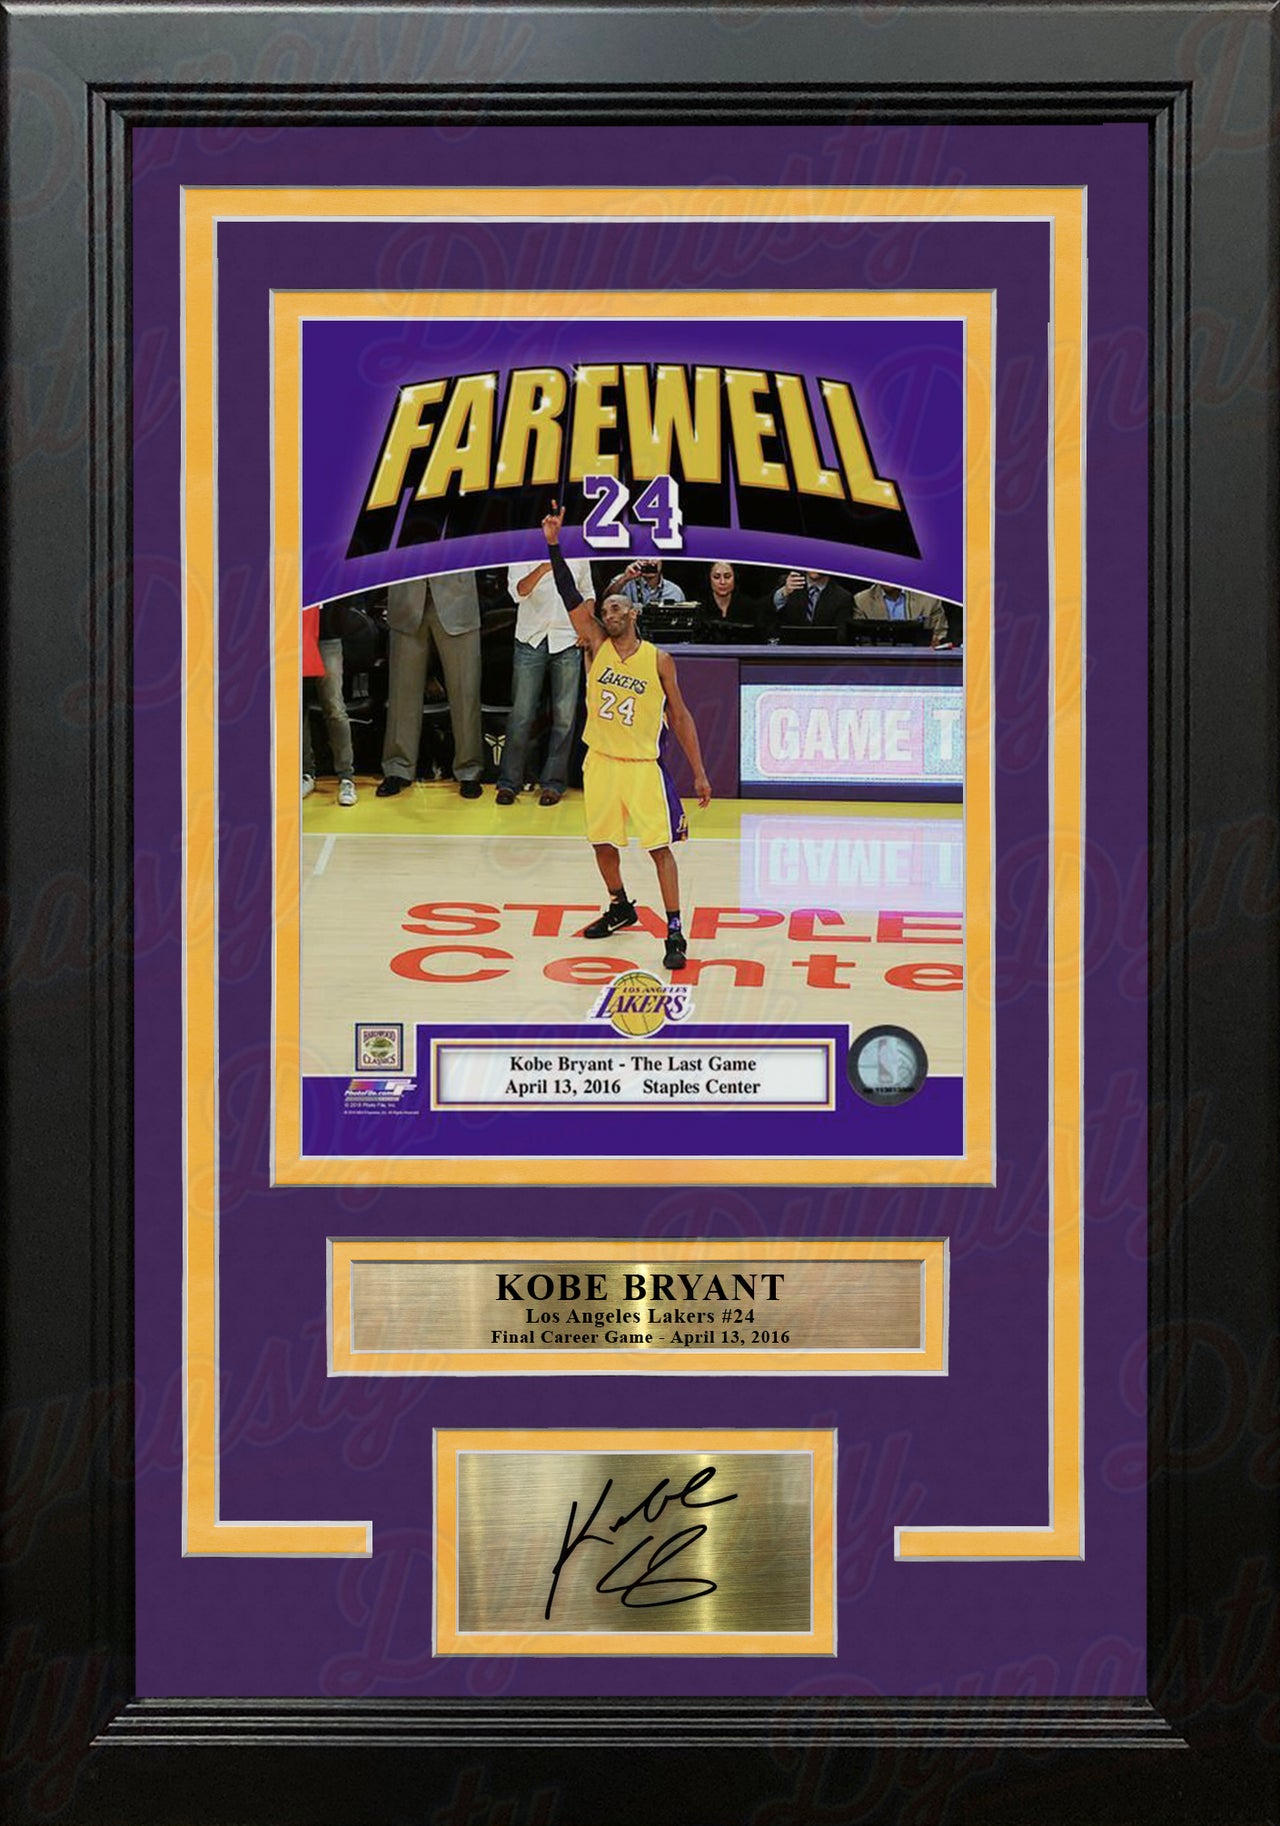 Kobe Bryant Final NBA Game Los Angeles Lakers 8x10 Framed Basketball Photo with Engraved Autograph - Dynasty Sports & Framing 